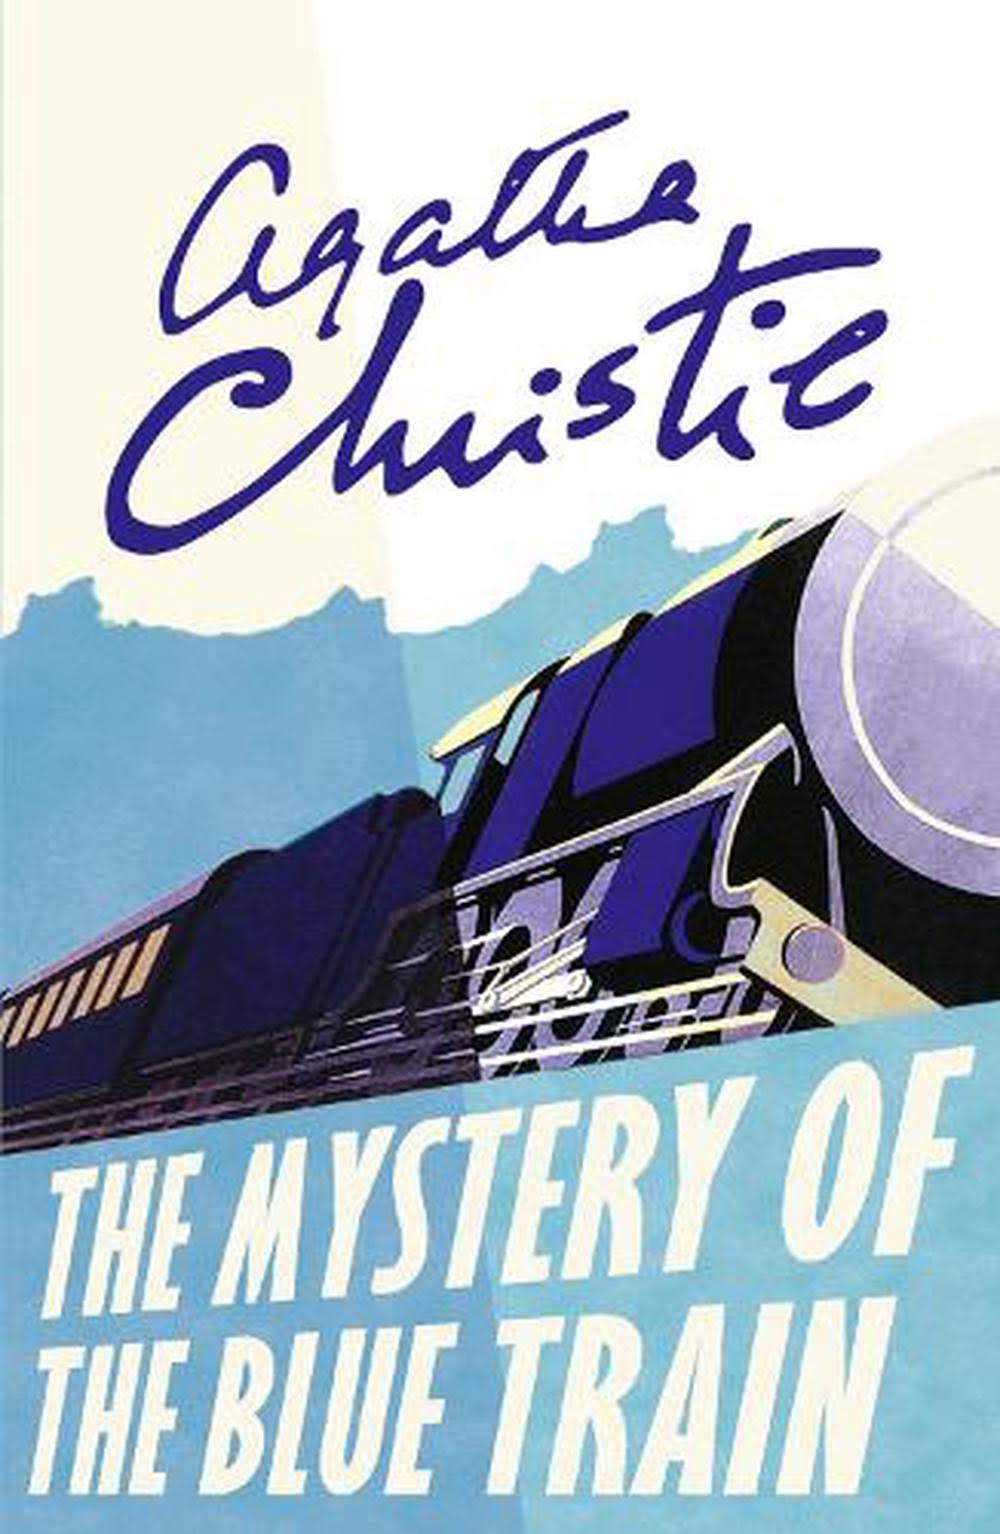 Poirot - The Mystery of The Blue Train by Agatha Christie